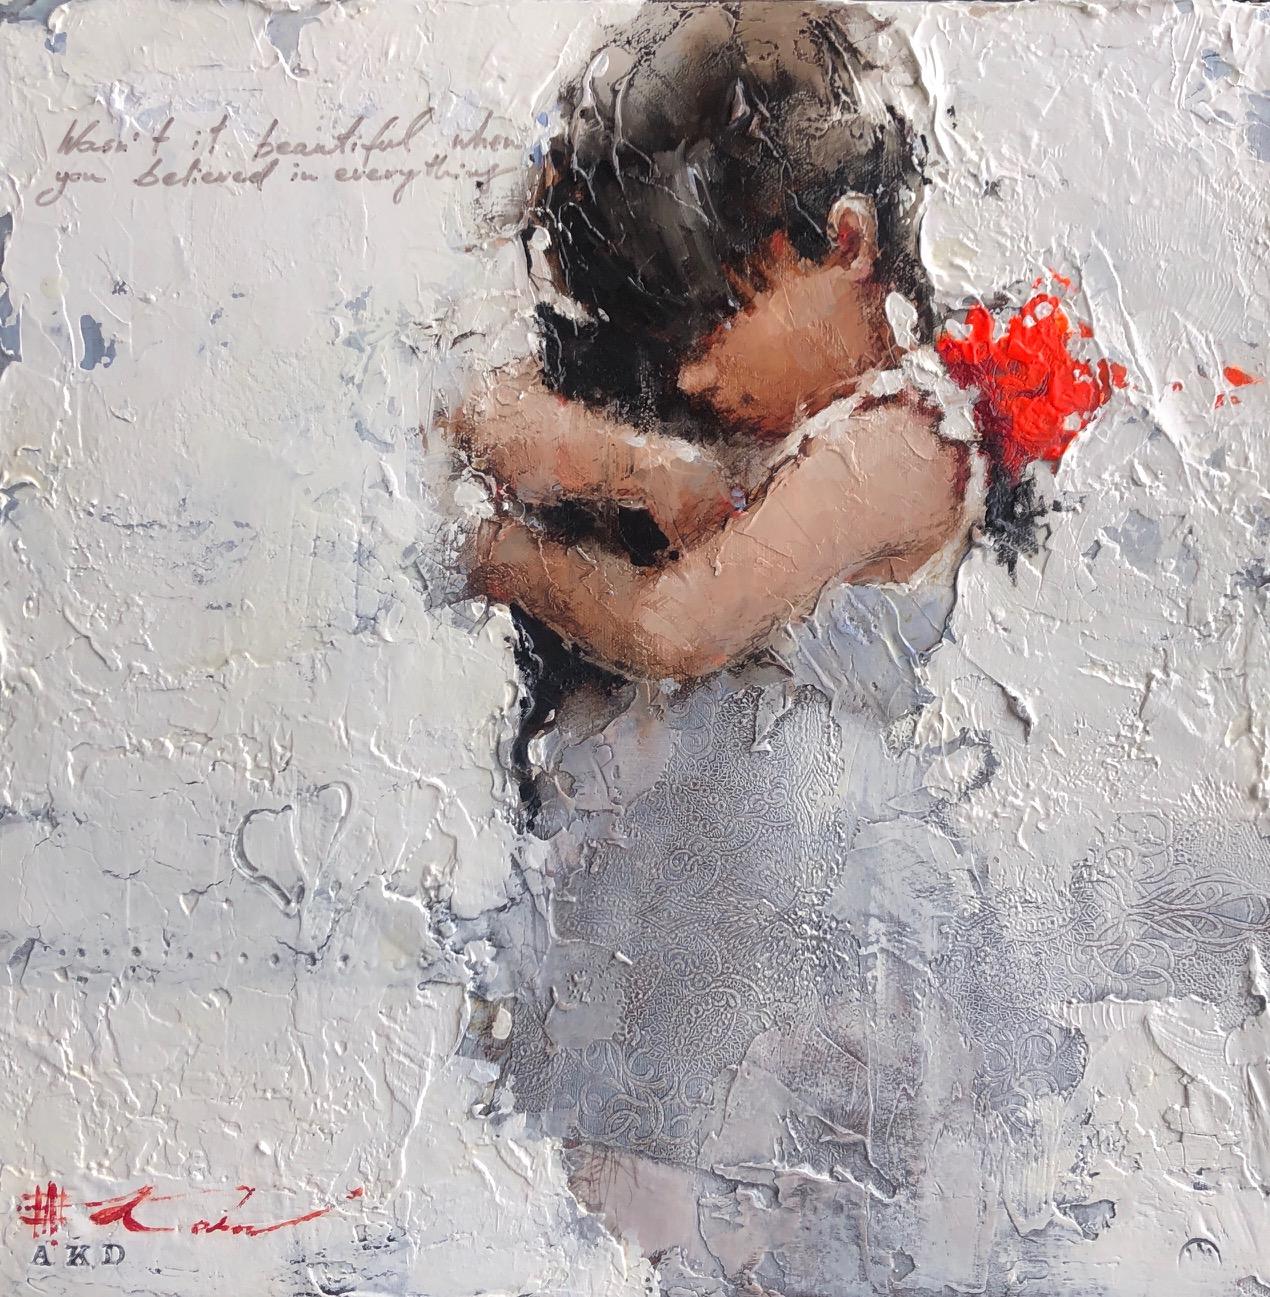 Andre Kohn  Figurative Painting - “Esquisse on the theme of Rouge et Noir" by Andre Kohn. Figurative Impressionist